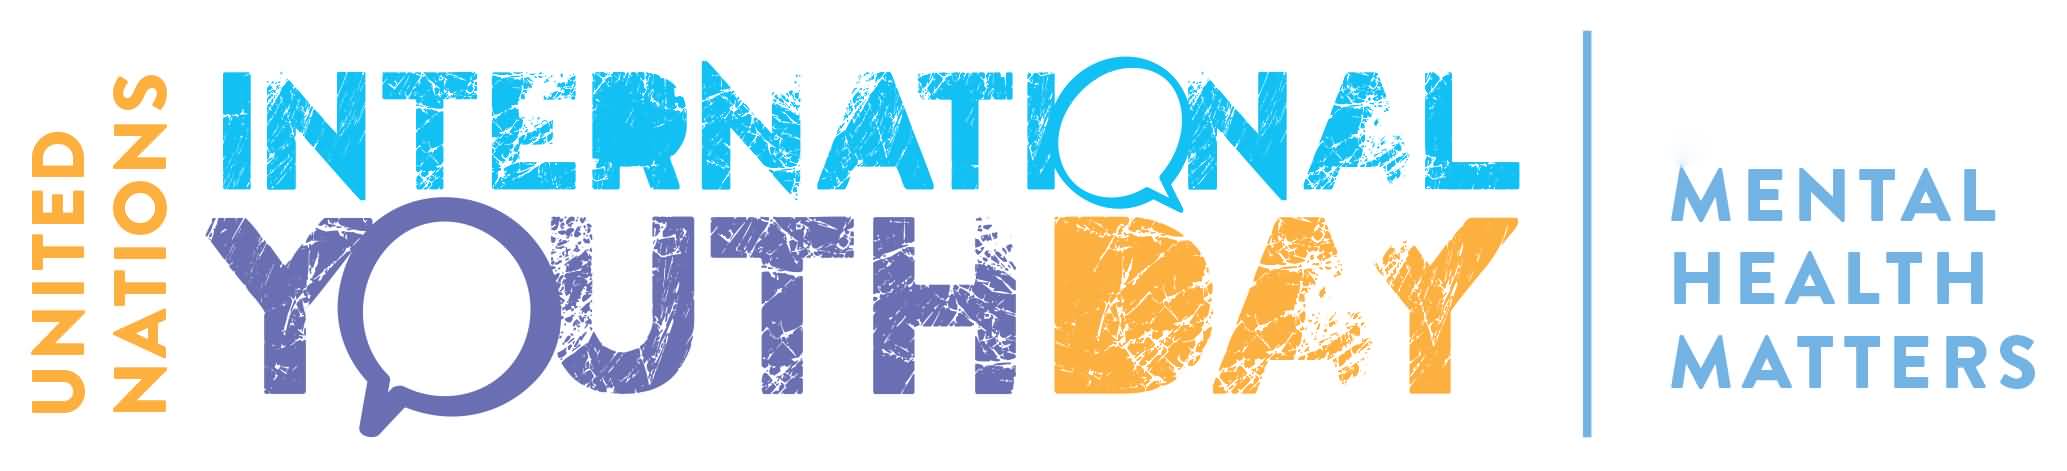 Mental Health Matters – International Youth Day Wishes